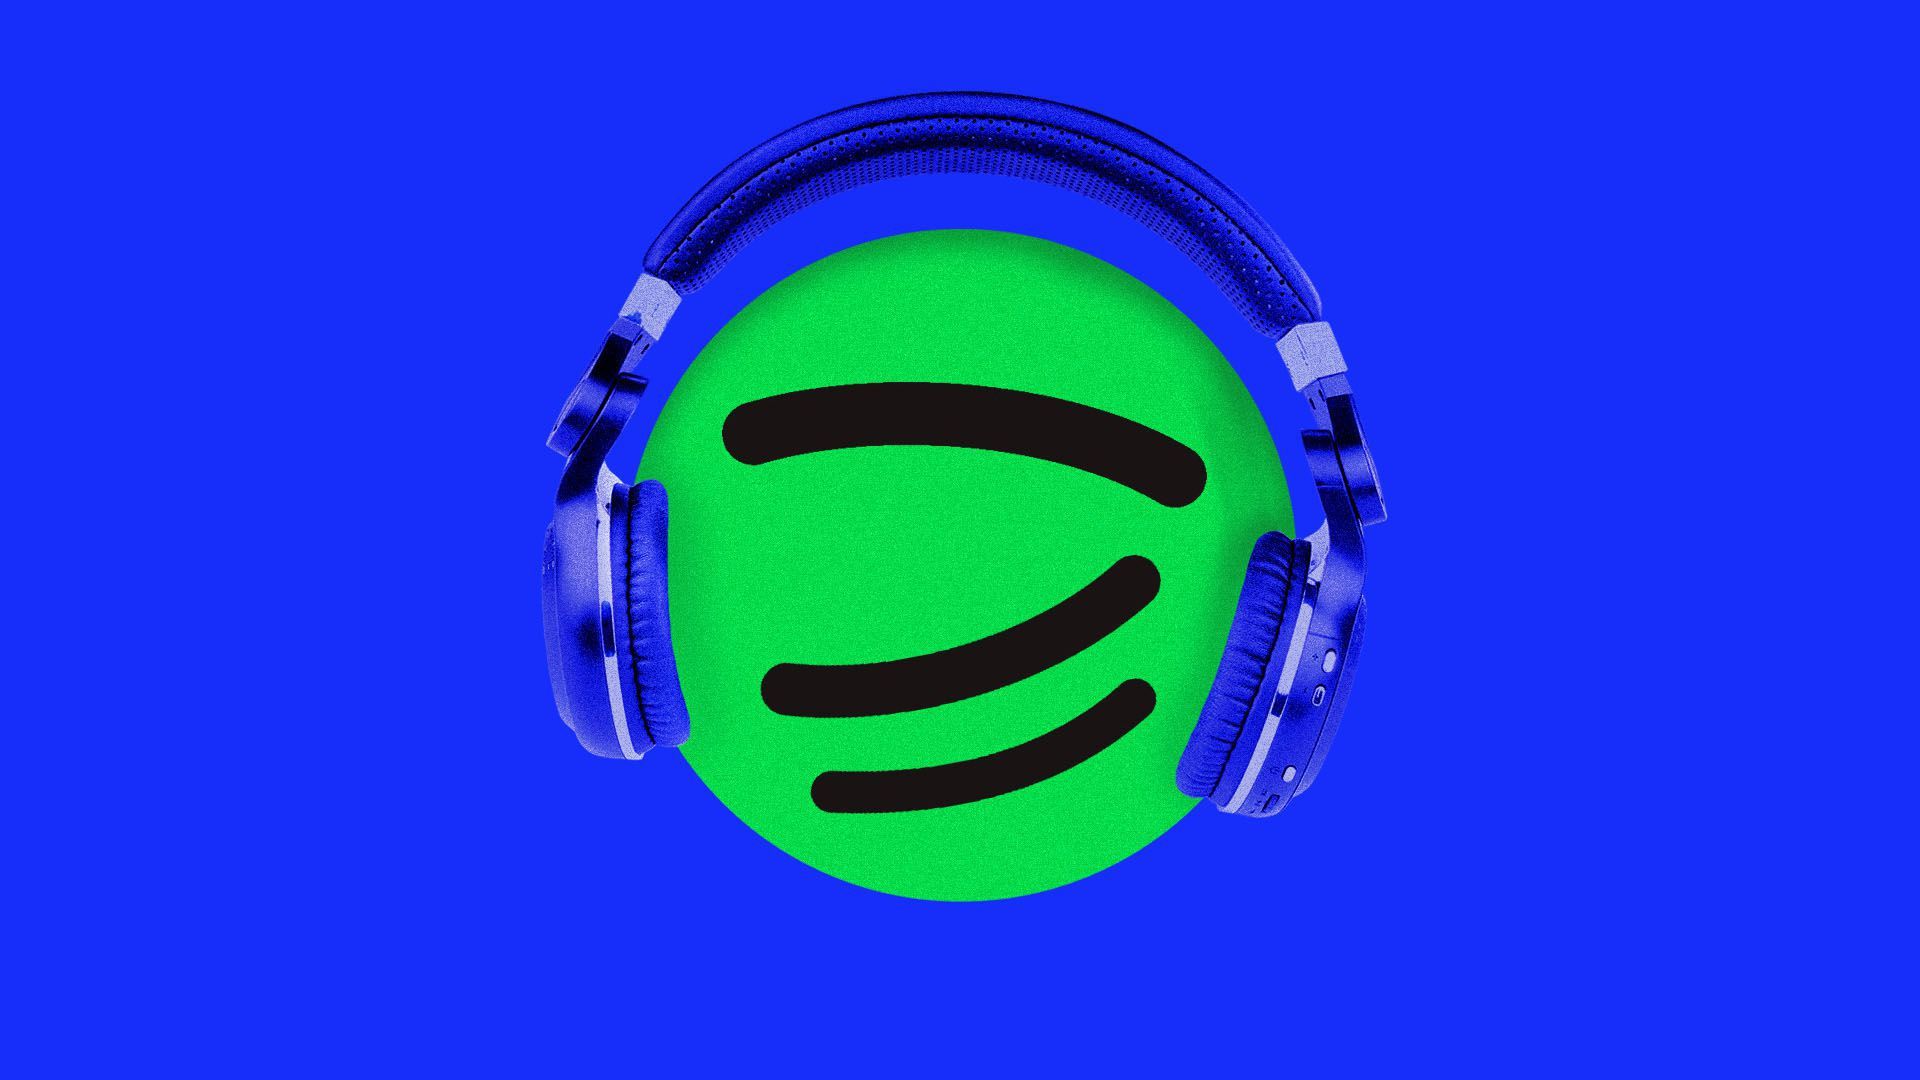 The spotify logo listening to music